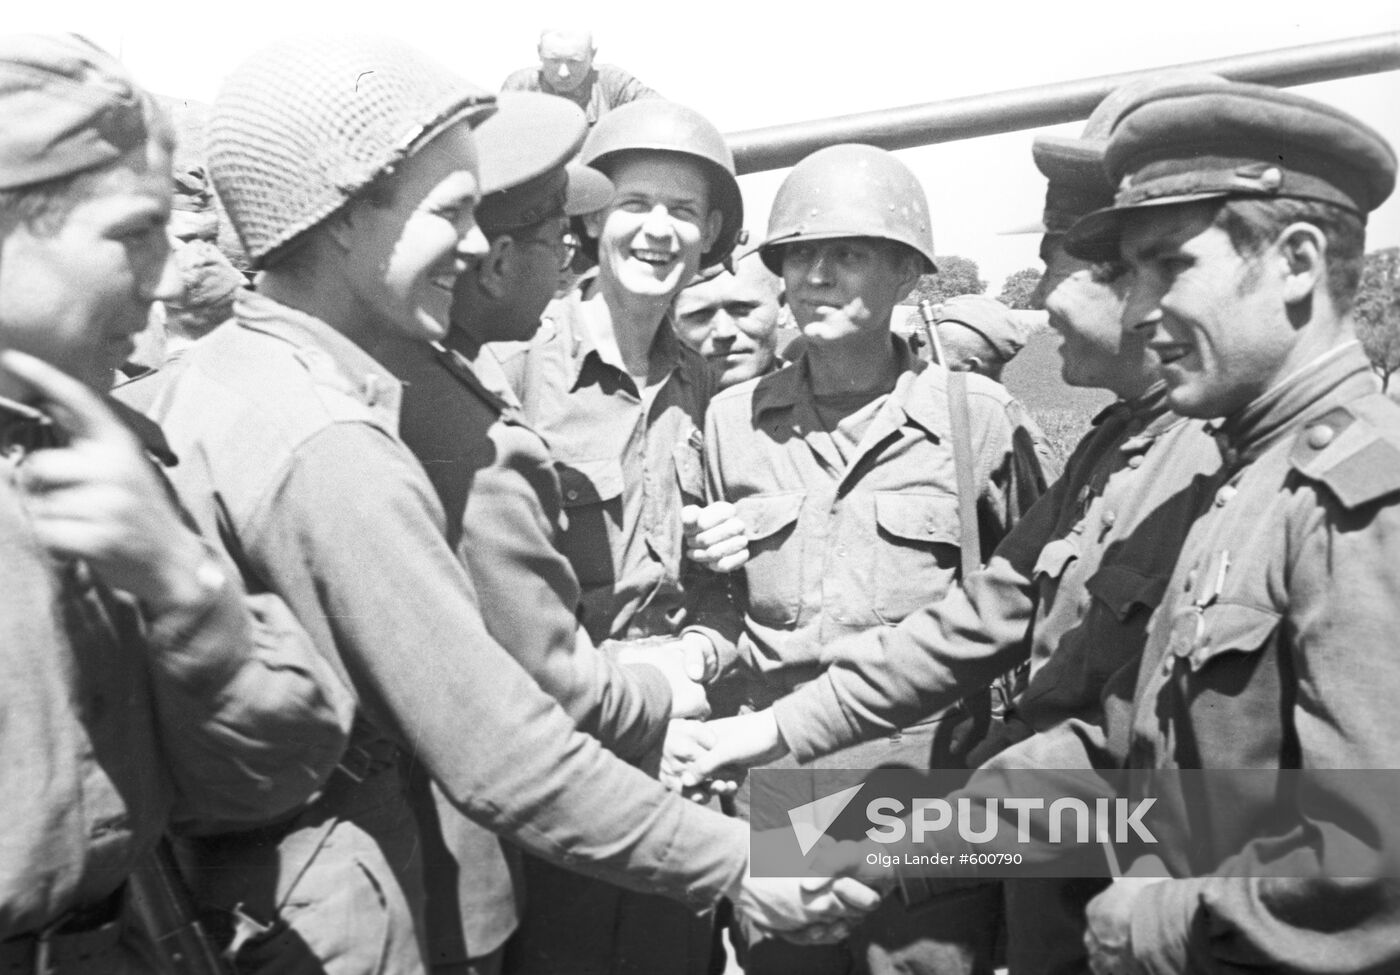 US soldiers congratulating Soviet officers with victory